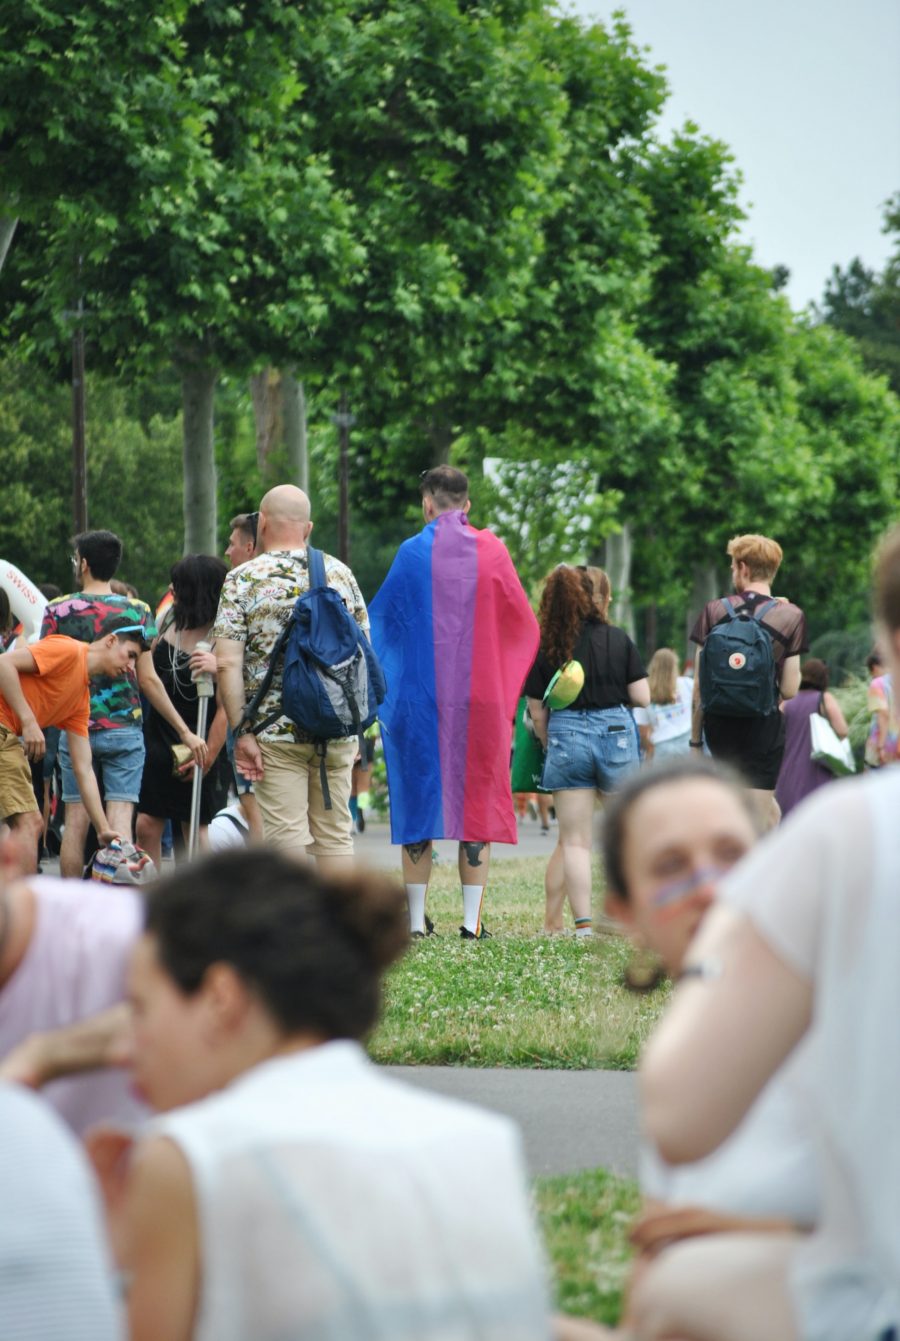 Person wearing a bisexual pride flag (pink, purple and blue)